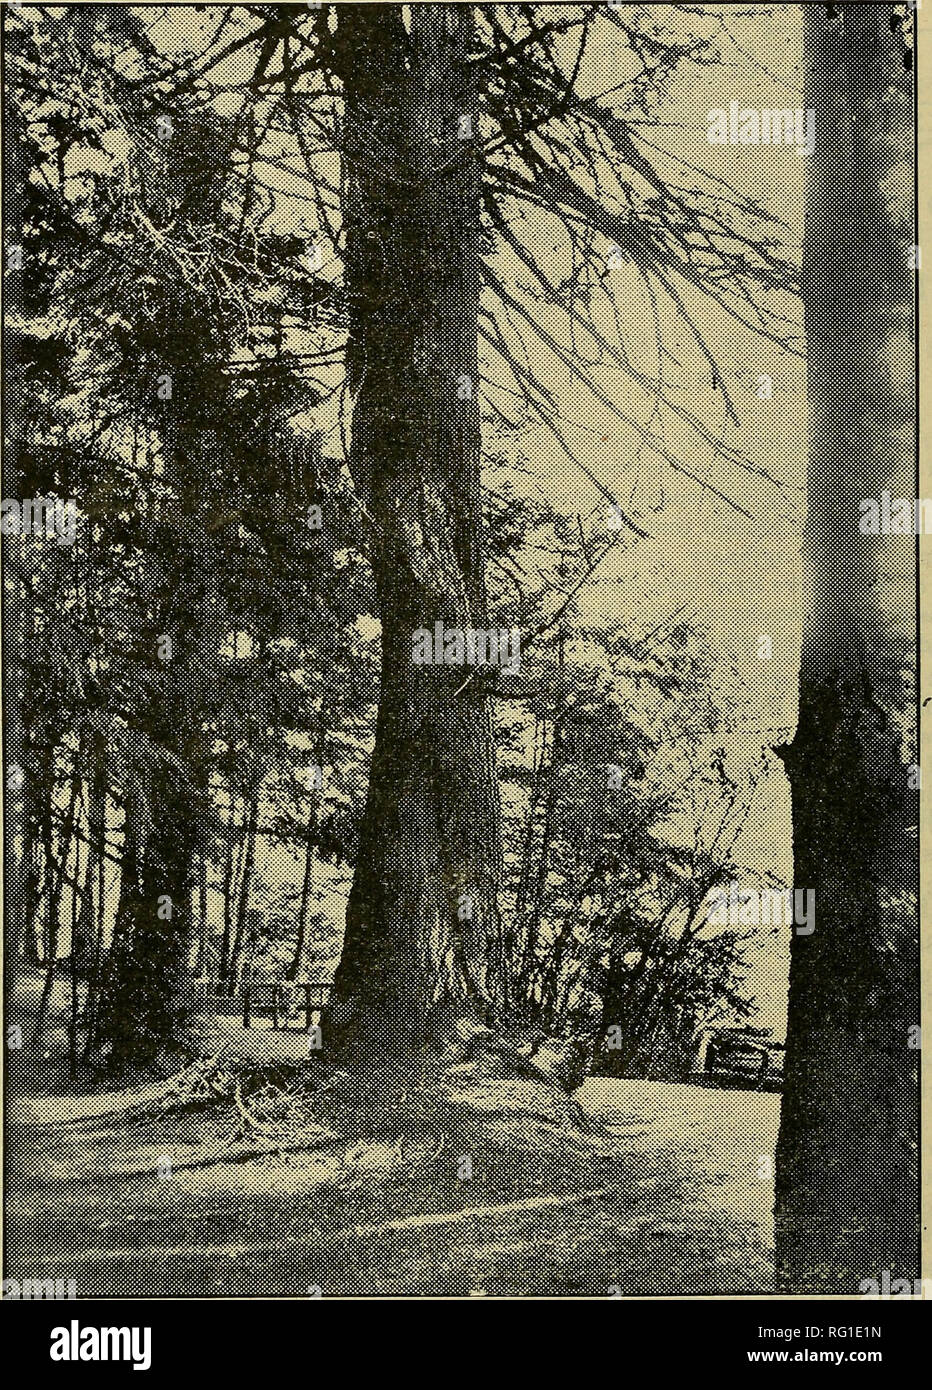 . The Canadian field-naturalist. 132 The Canadian Field-Naturalist [Vol. XXXIX. TWINING FIRS Figure No. 1.—Grand fir. Abies Grandis, Lindley. Twine to the left by one Grand fir around another tree of the same species. The &quot;Gorge Park&quot;, Victoria, B.C. being healed over by a callus formation from the parent tree. The explanation of the multiple leader formation may be that it is a case where the leader of the young fir was destroyed and the lower branches all tried to become substitute leaders. (See The Canadian Field Naturalist, Vol. XXXIX, No. 5, Fig 5, p. 99, Fig 6, p. 100.) One of  Stock Photo